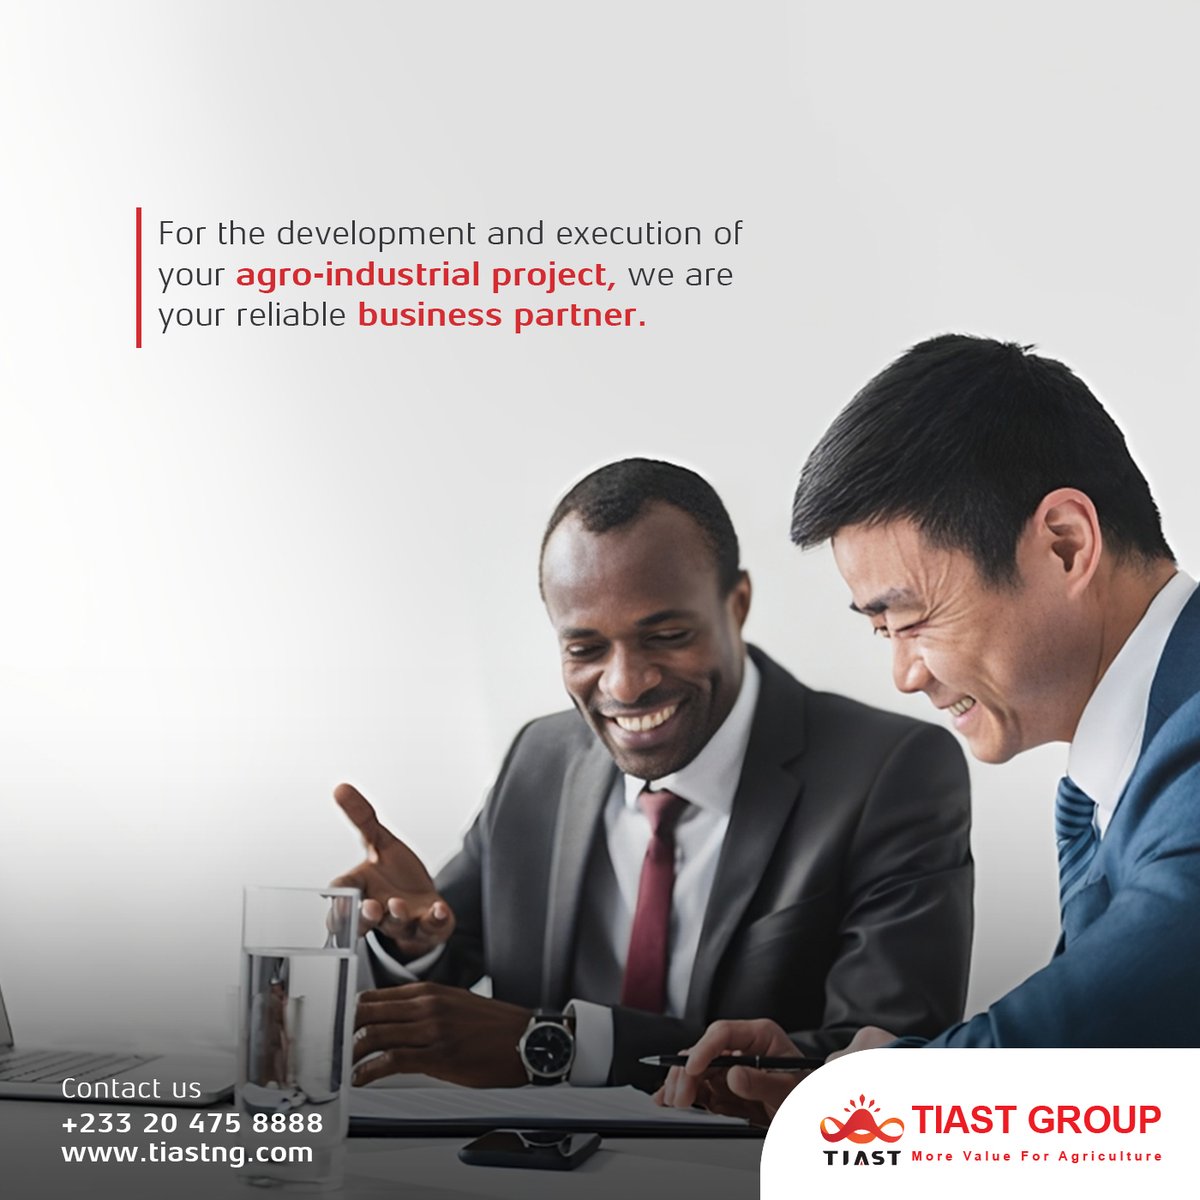 We are your reliable business partner.

#tiastgroup #CONNECT #agroriches #business
#agriculture #connect #industrialisation